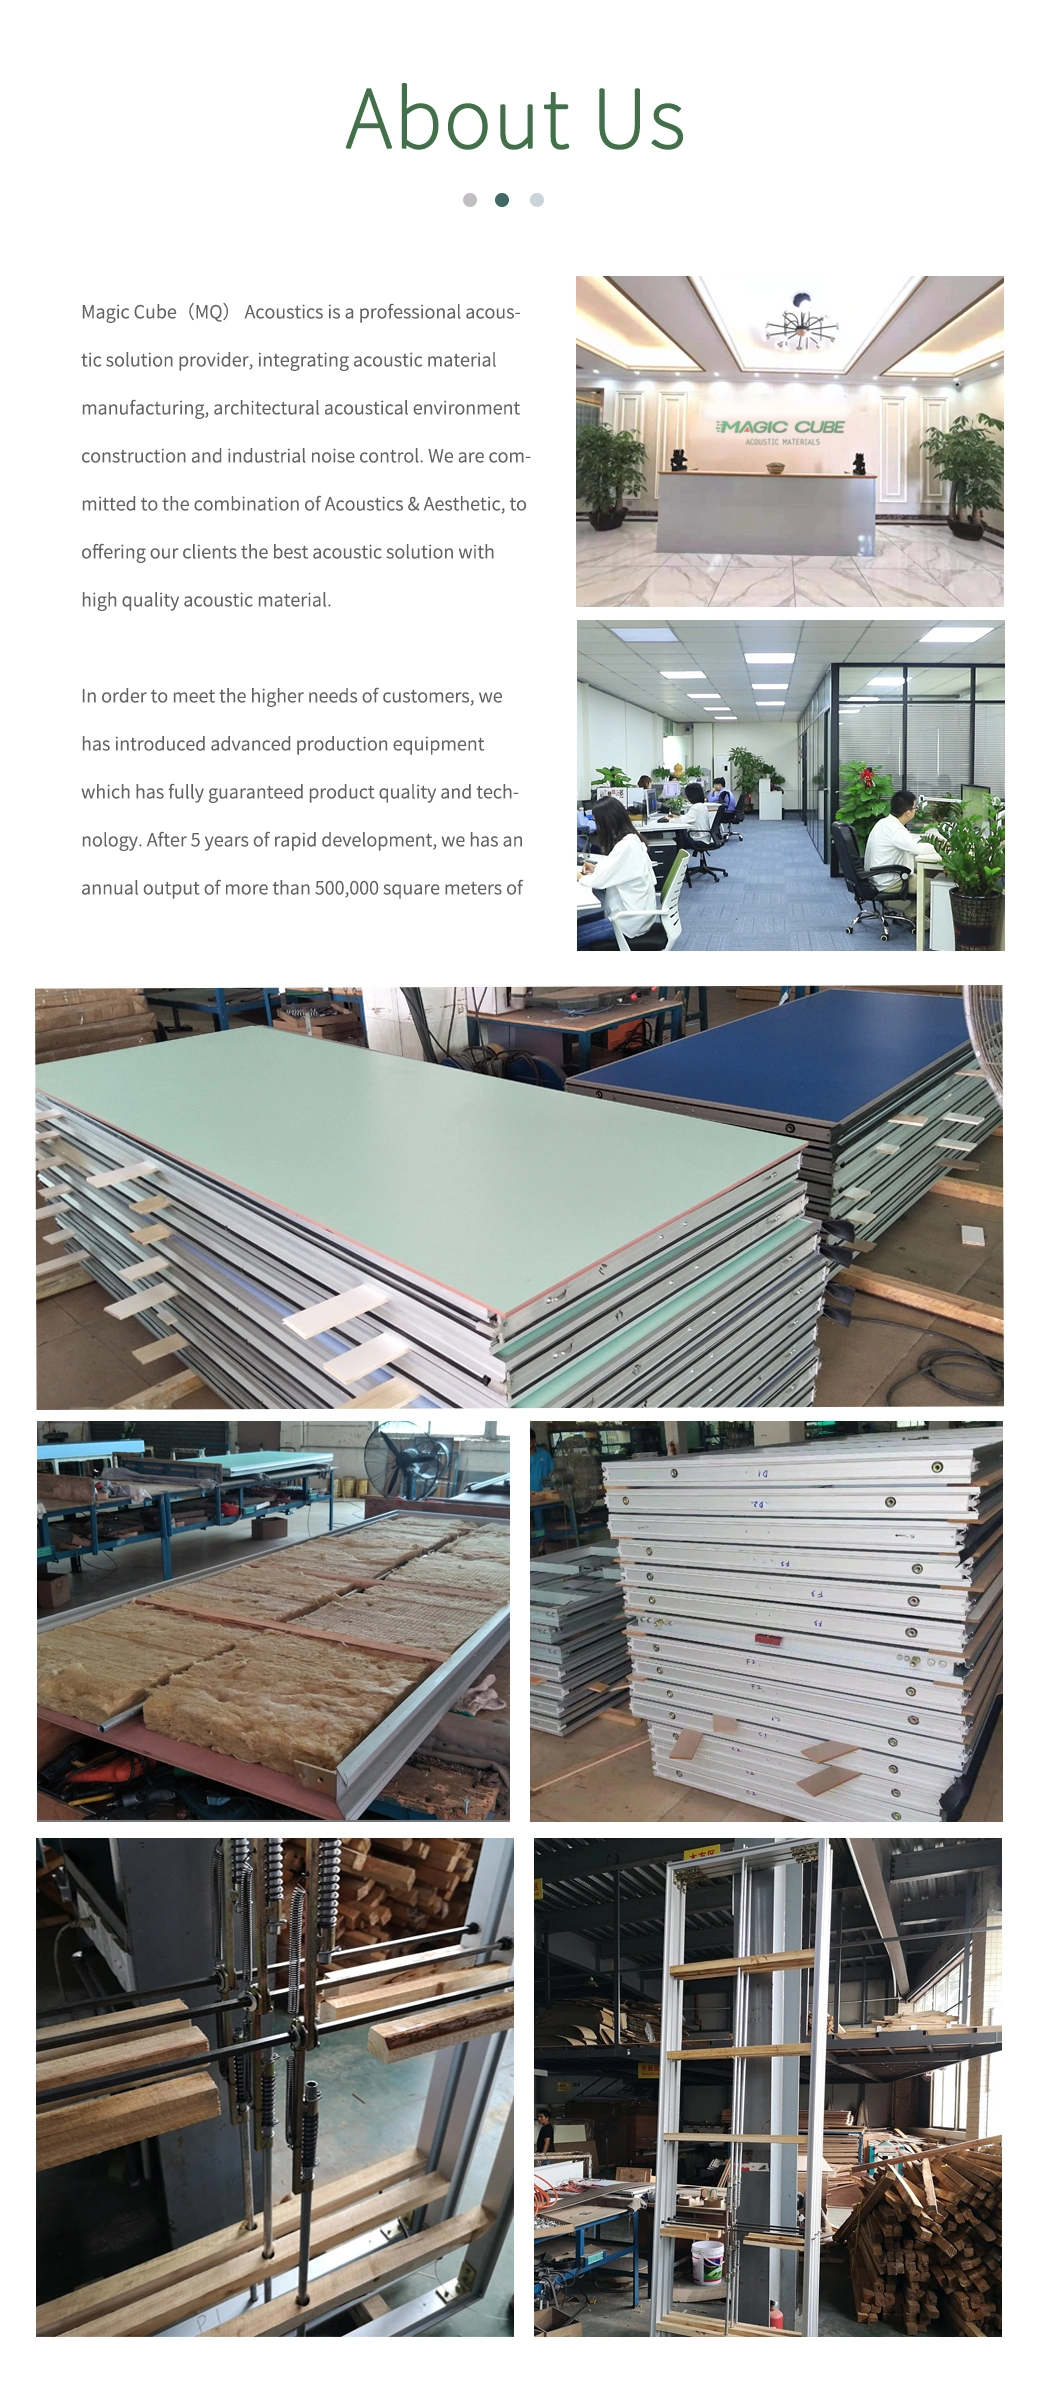 Electrically Operated Movable Partition Walls Dividers Movable Office Partitions Walls for Hotel Hall